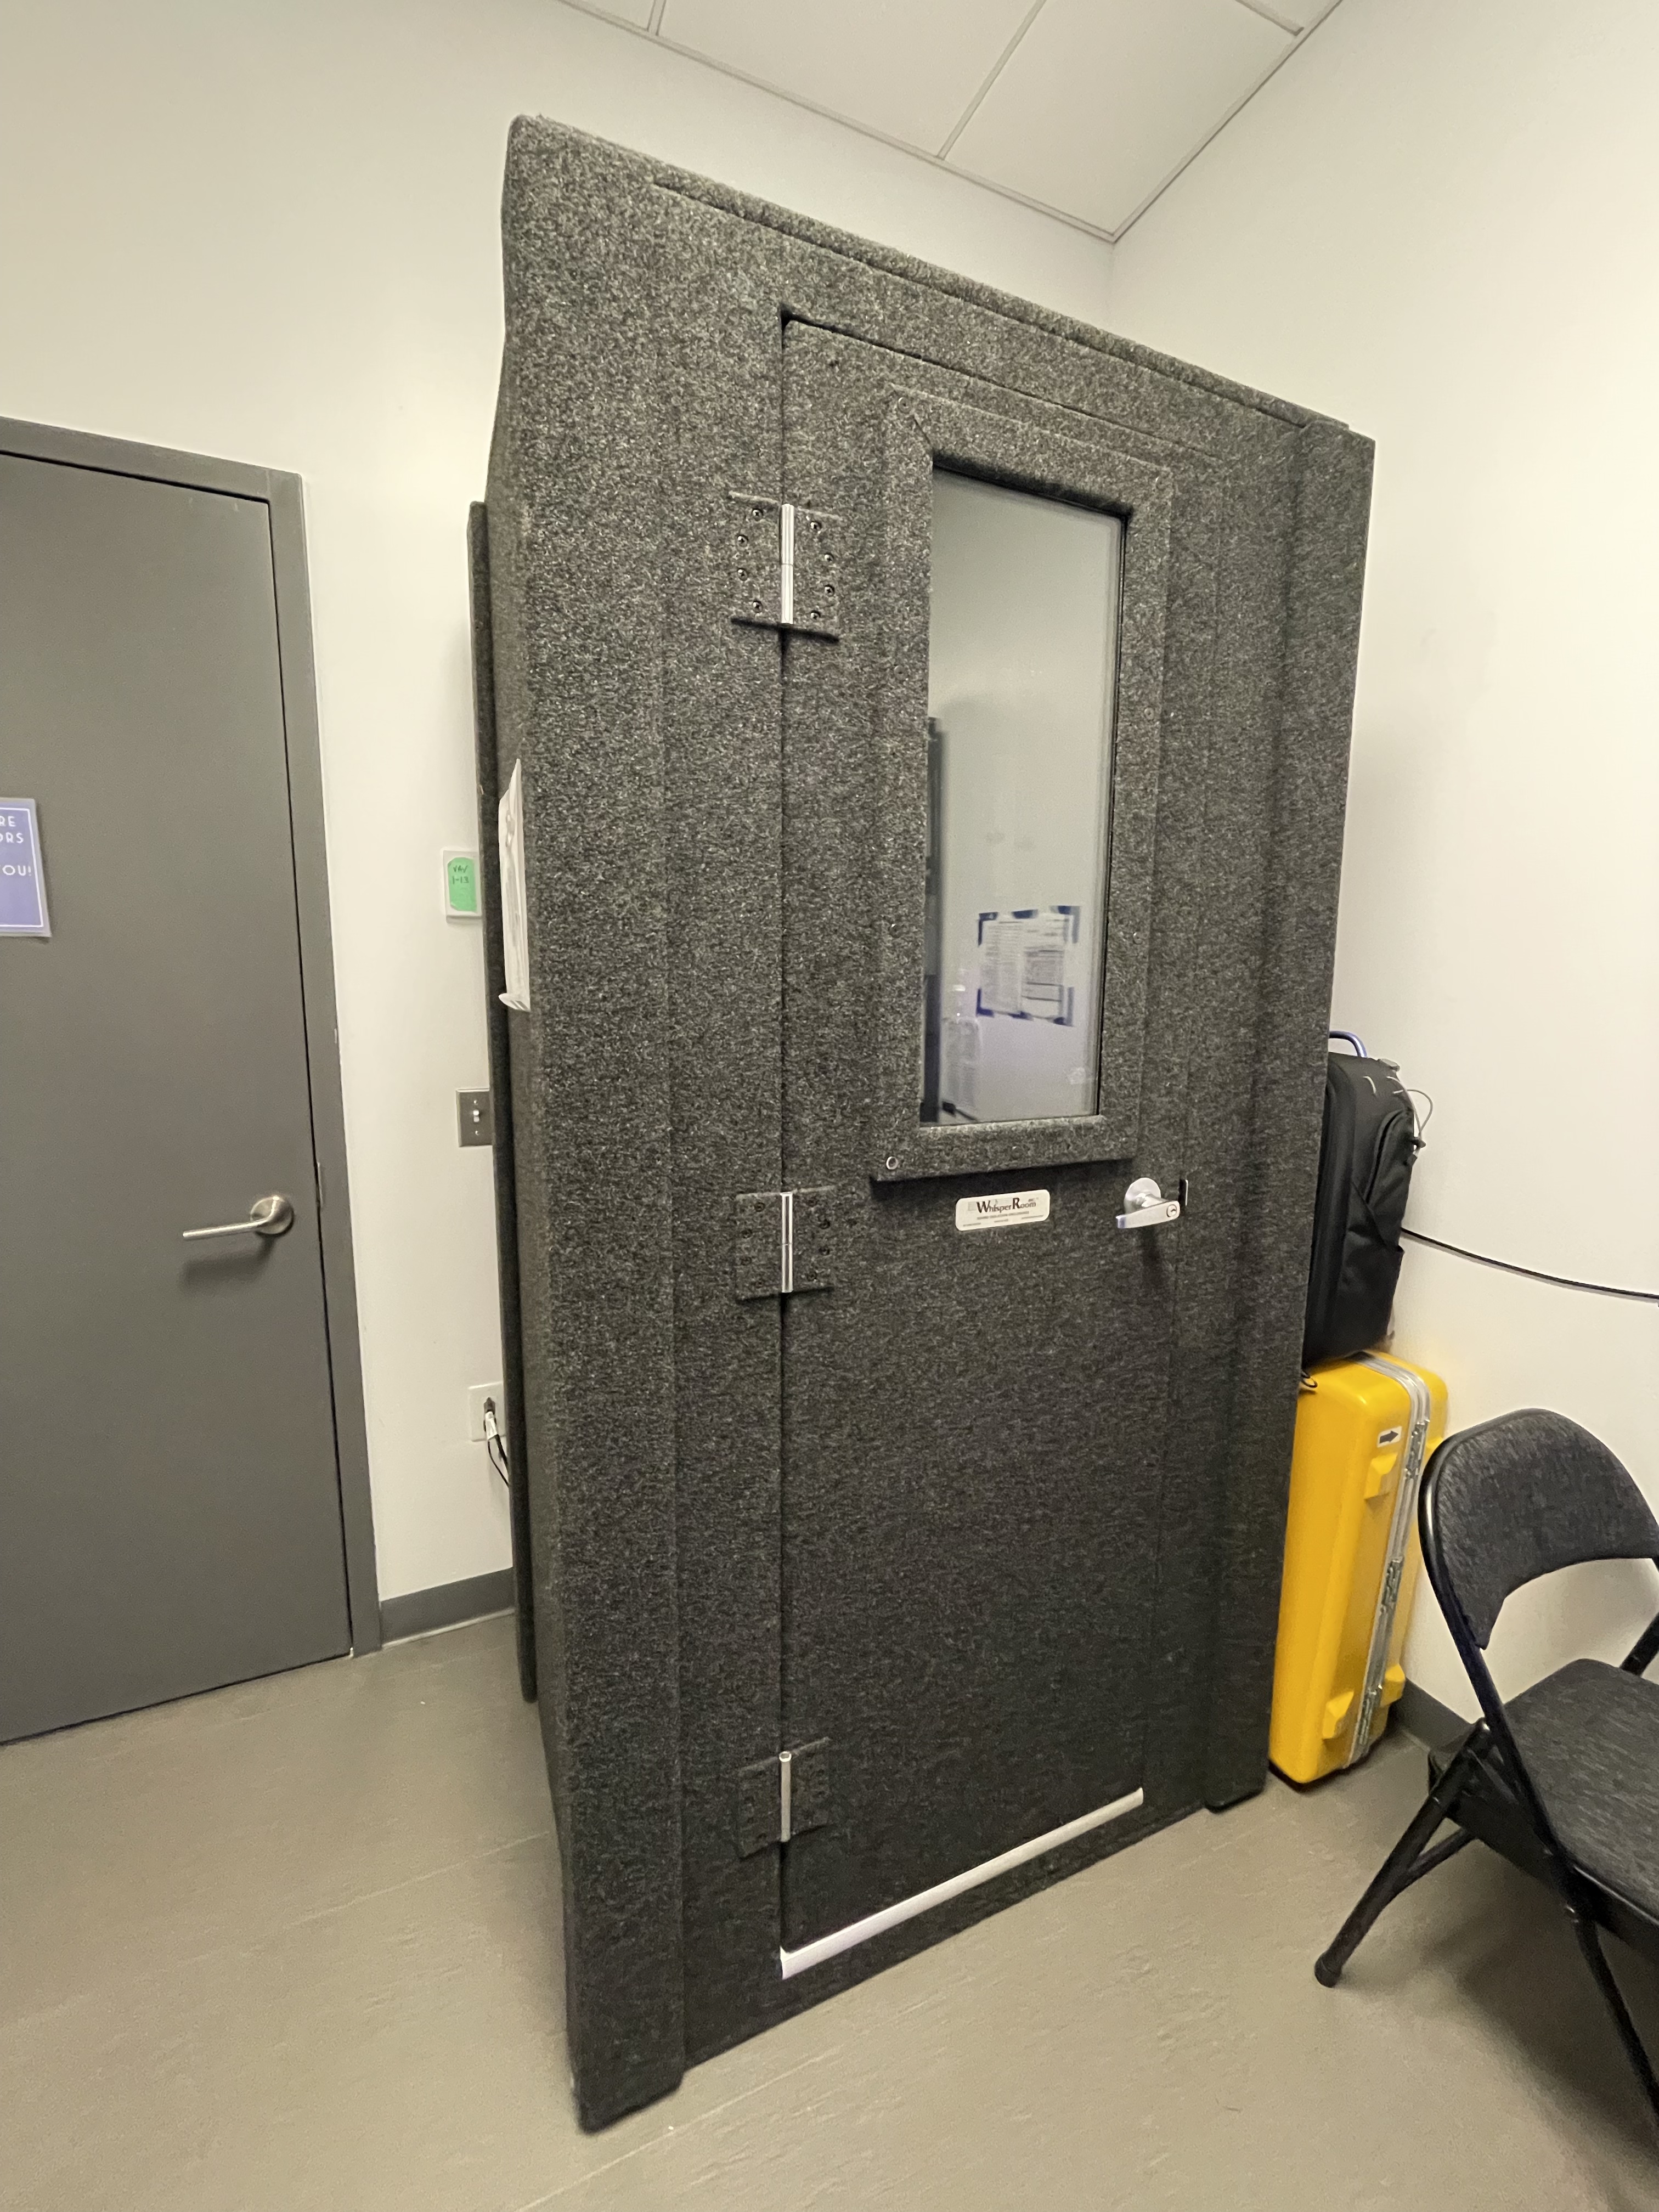 Single user-sized soft audio booth with gray sound insulation felt. Contains a rectangular window to peek inside.